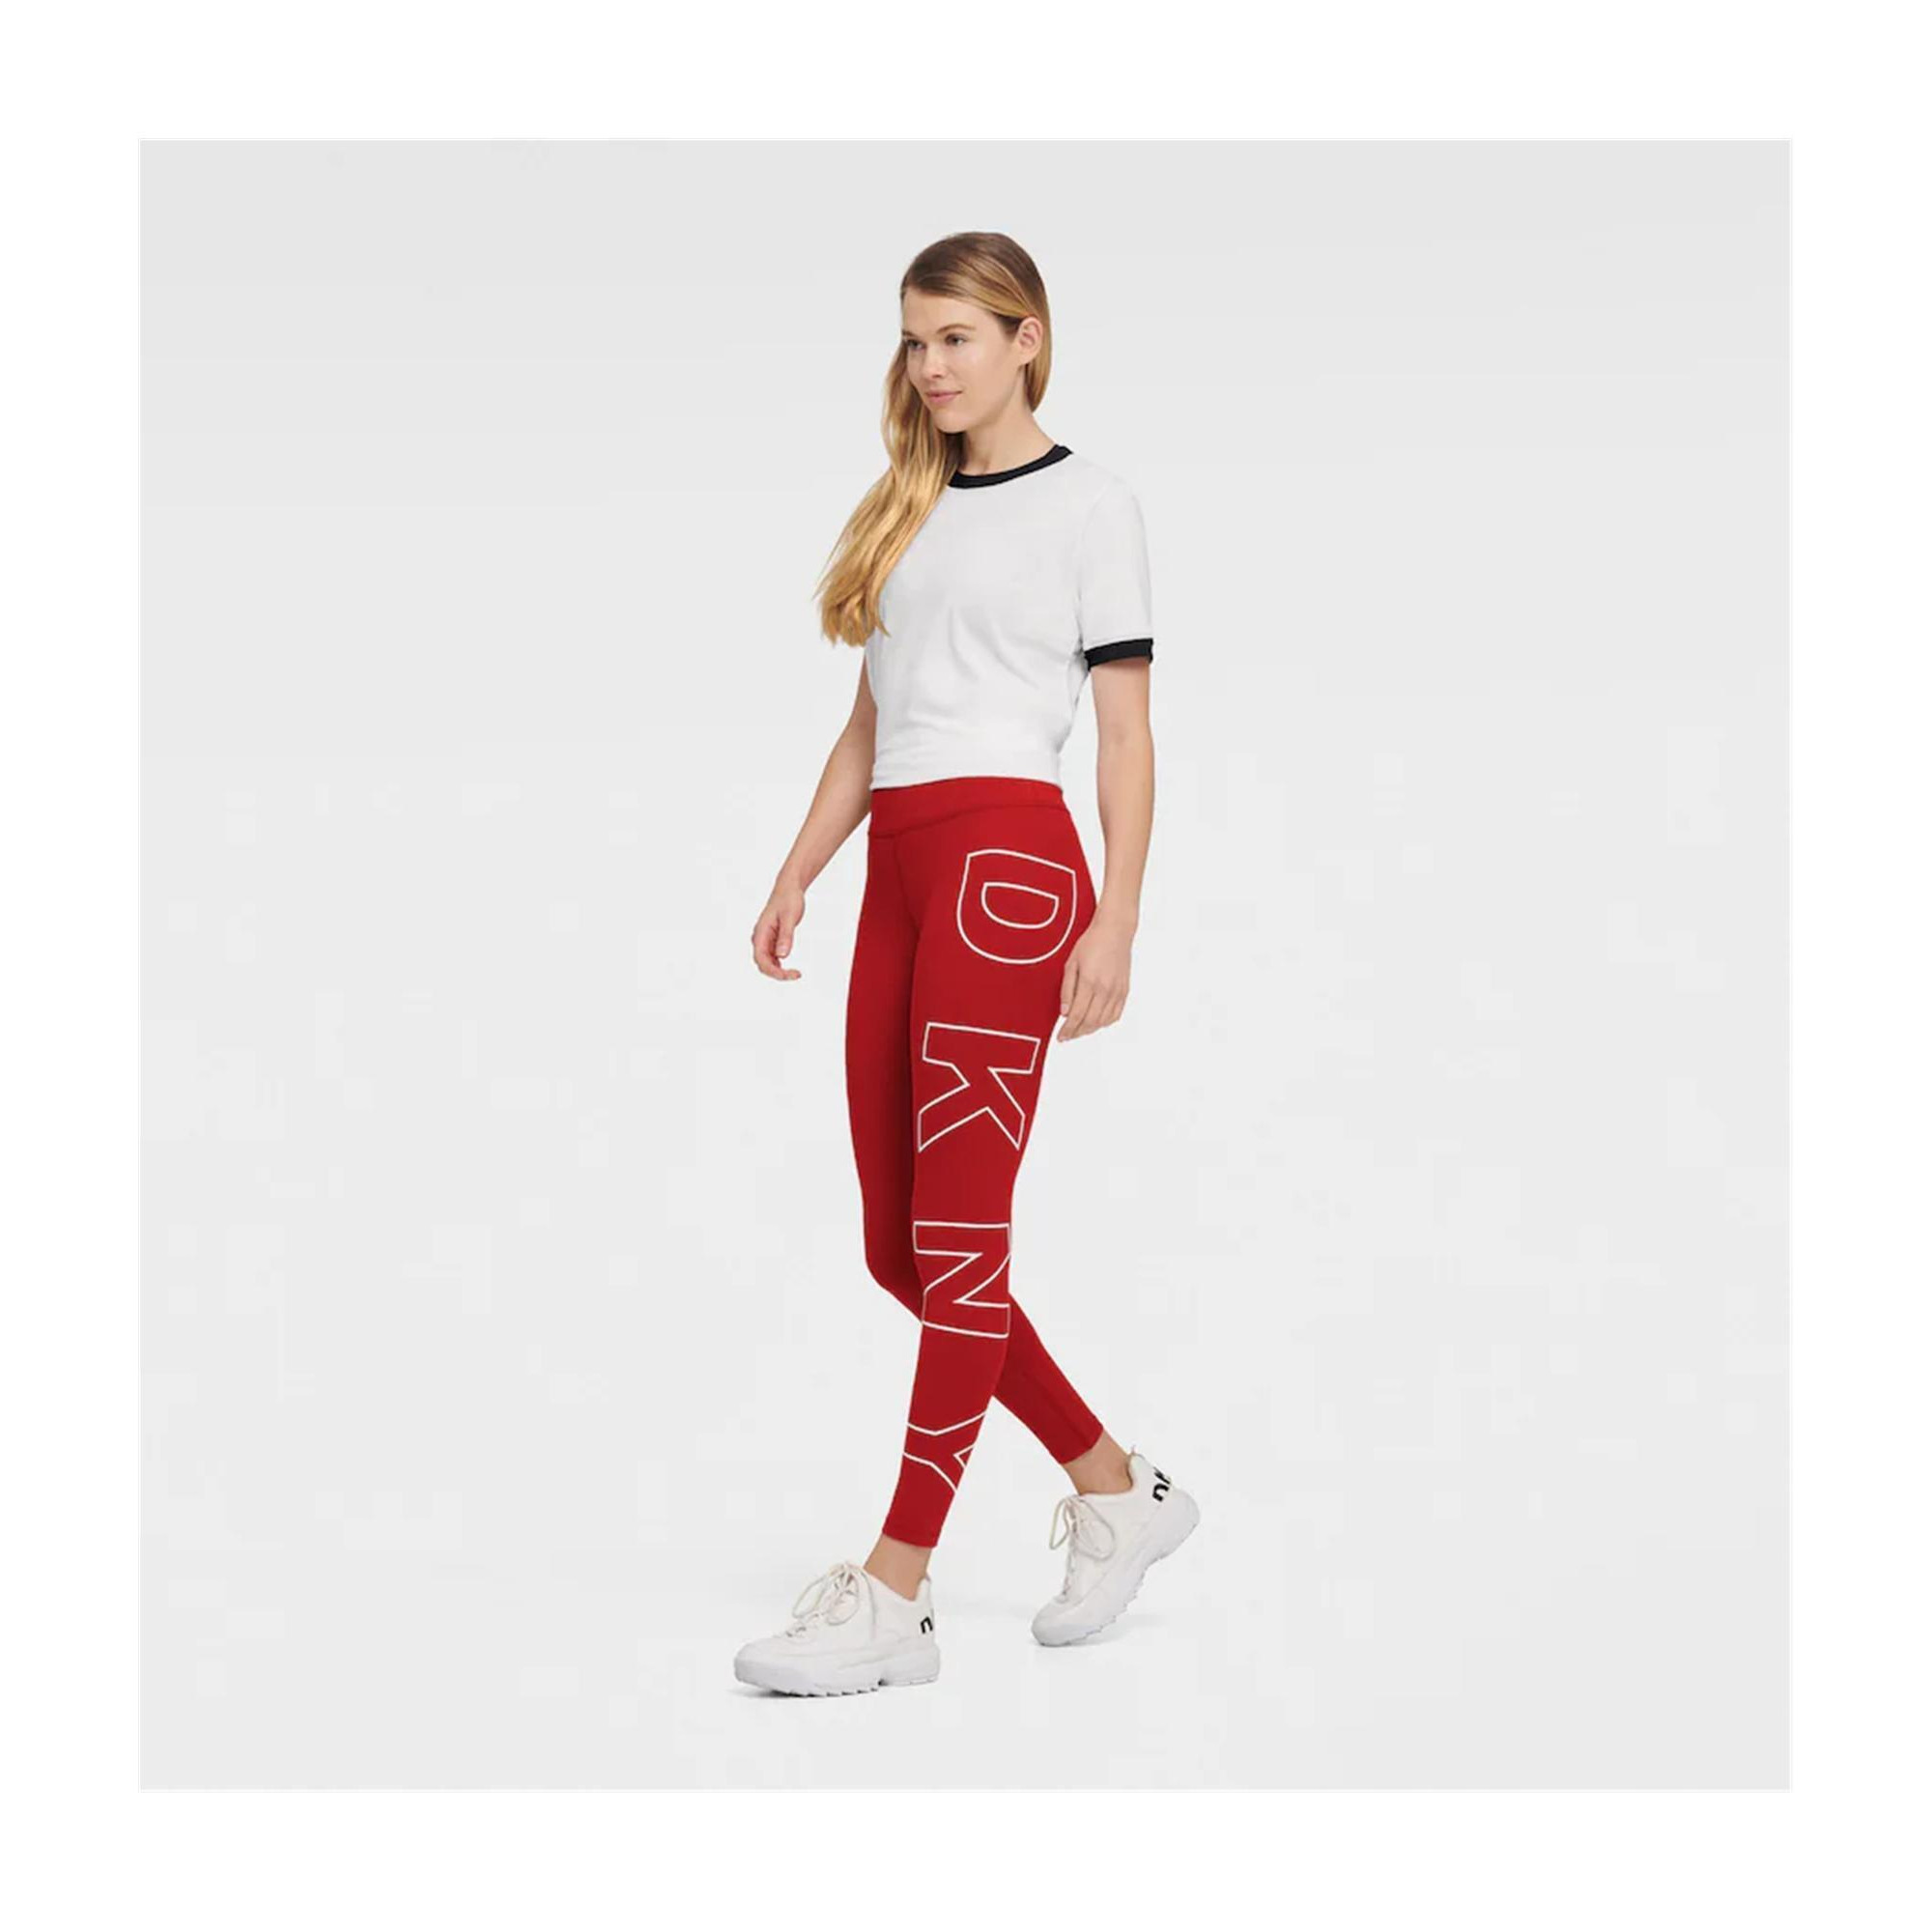 DKNY Womens Kansas City Chiefs Compression Athletic Pants, Style # DS00Z120 alternate image